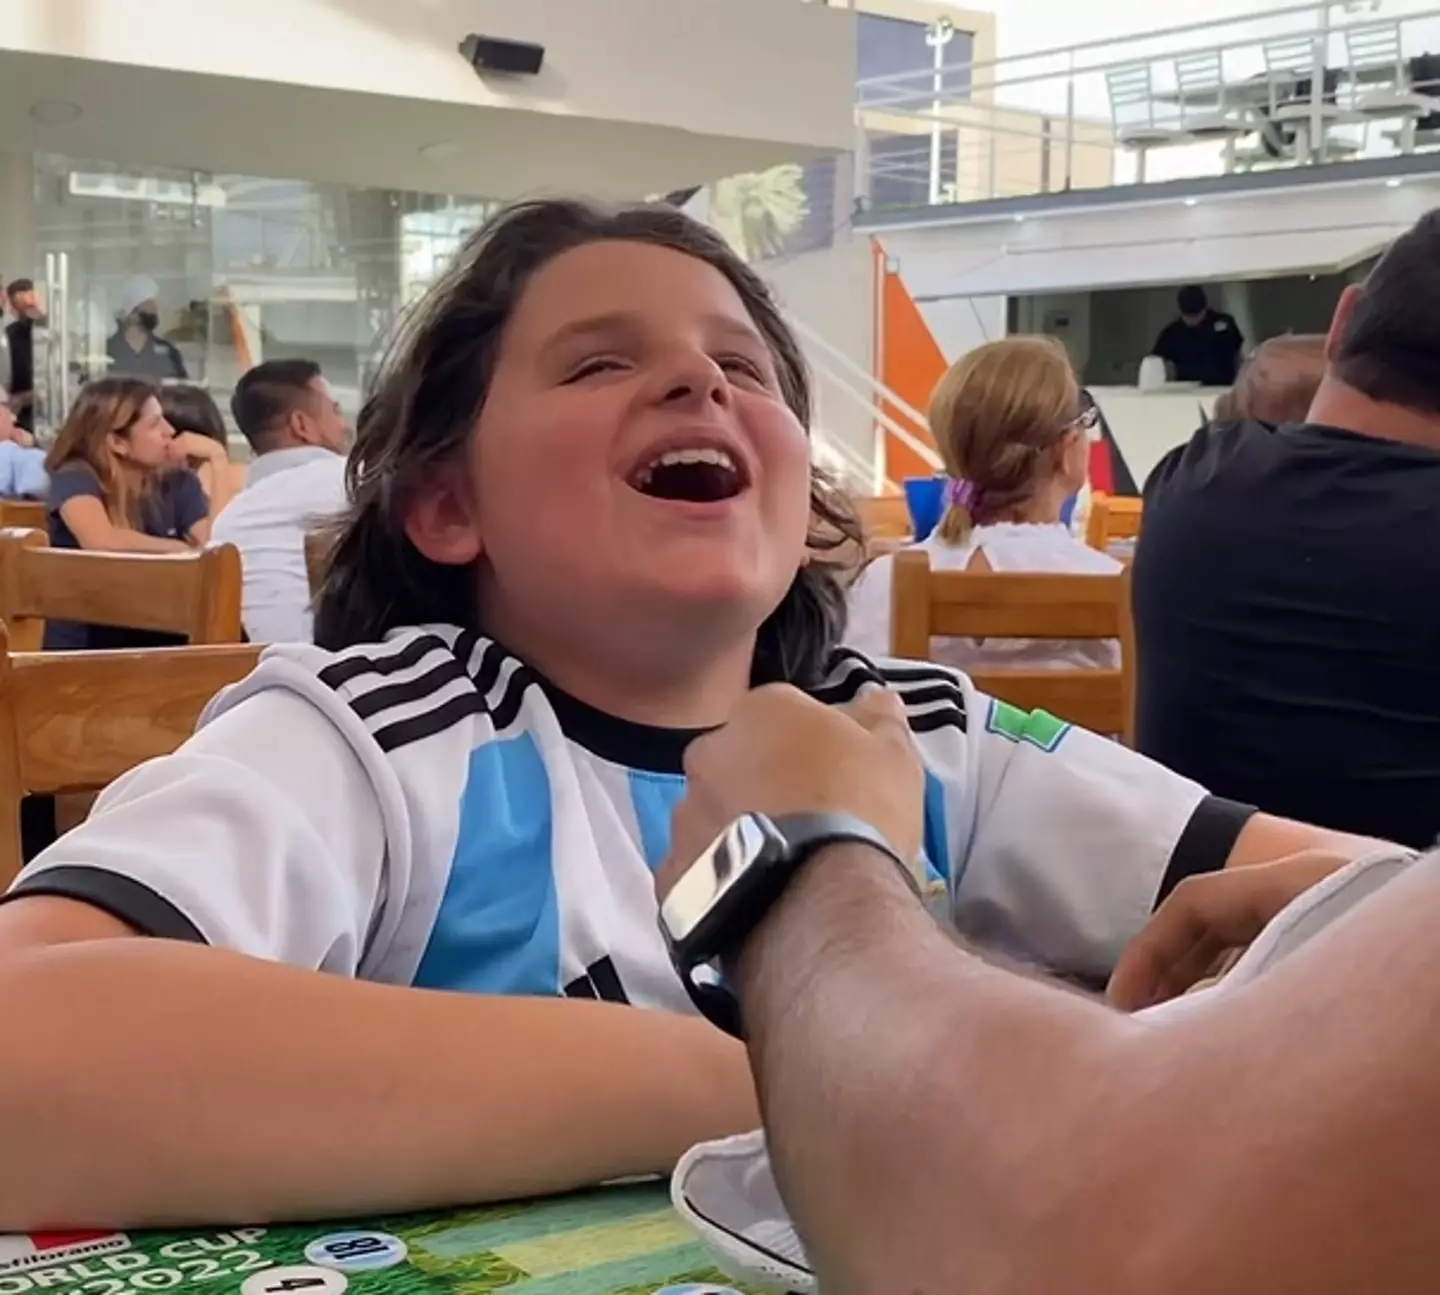 12-year-old Sebastian follows all of Messi's game and was overjoyed to hear that his hero had scored.